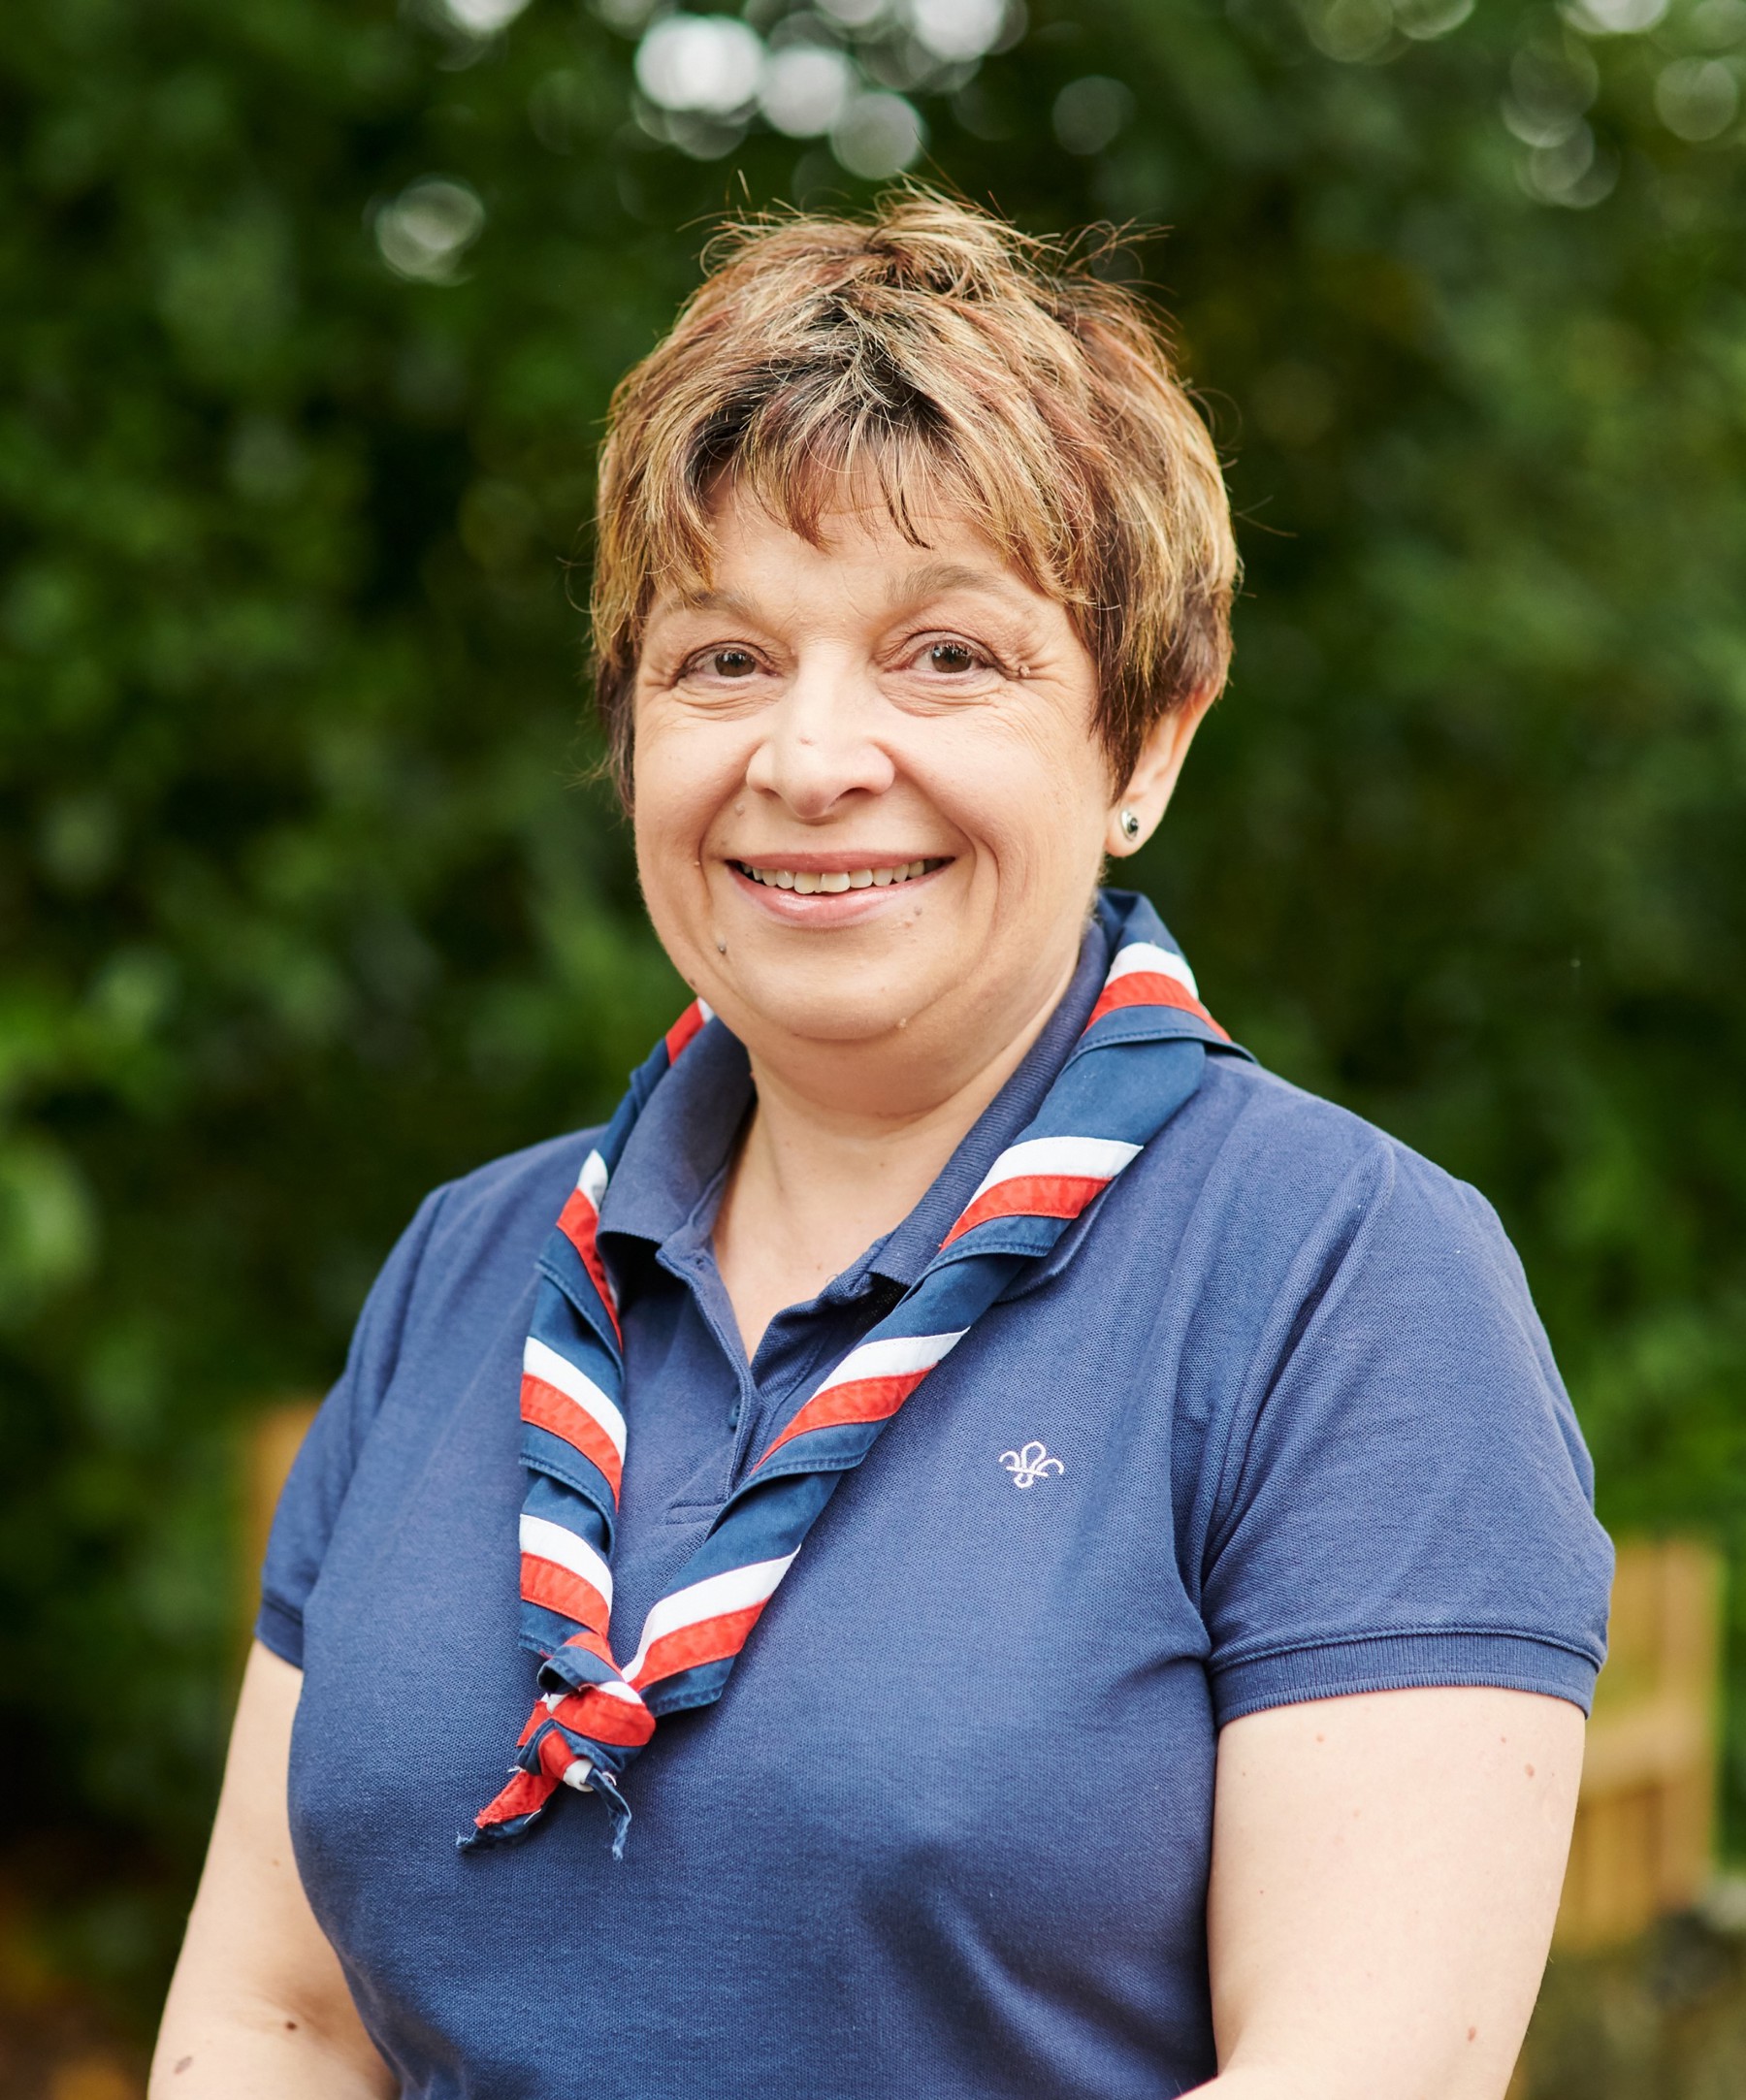 Susan Harris smiling at the camera wearing a navy polo shirt and stripy scarf